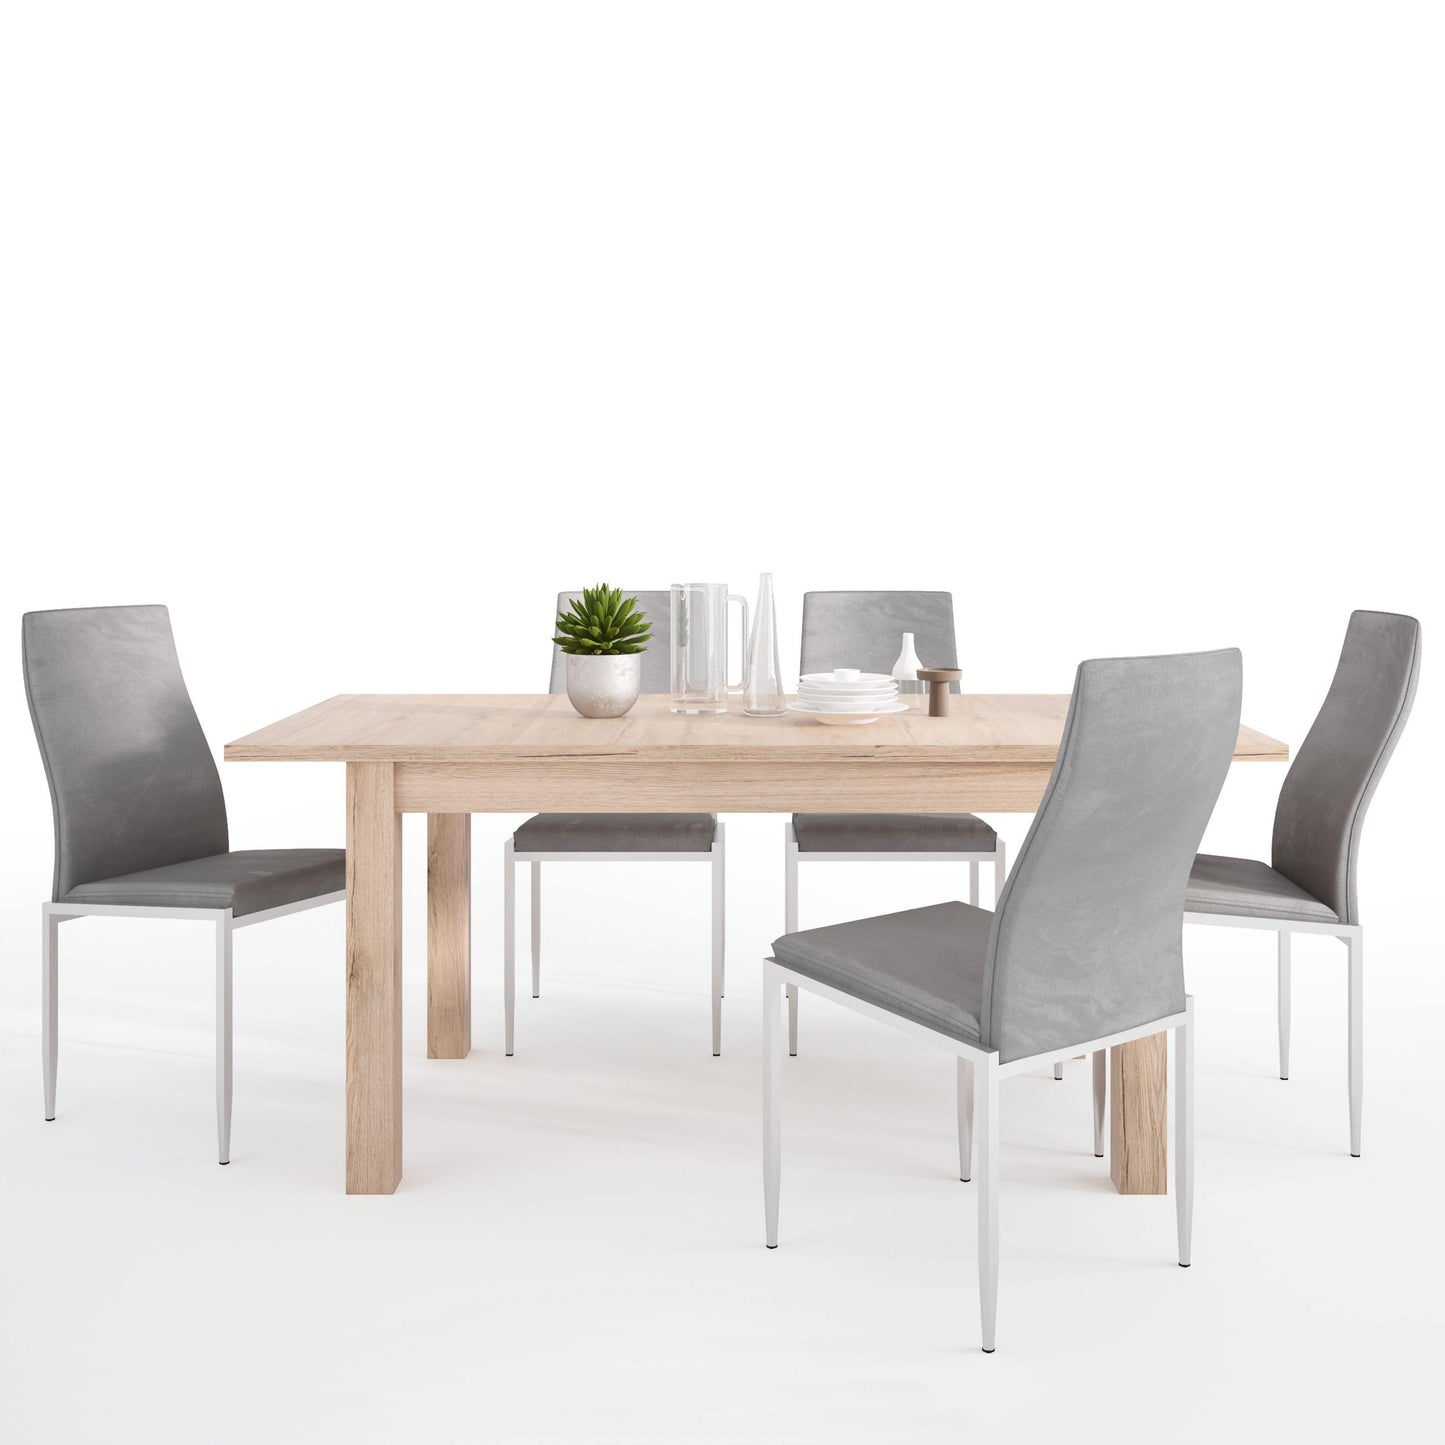 Dining set package Kensington Extending Dining Table + Milan High Back Chair - Home Utopia 